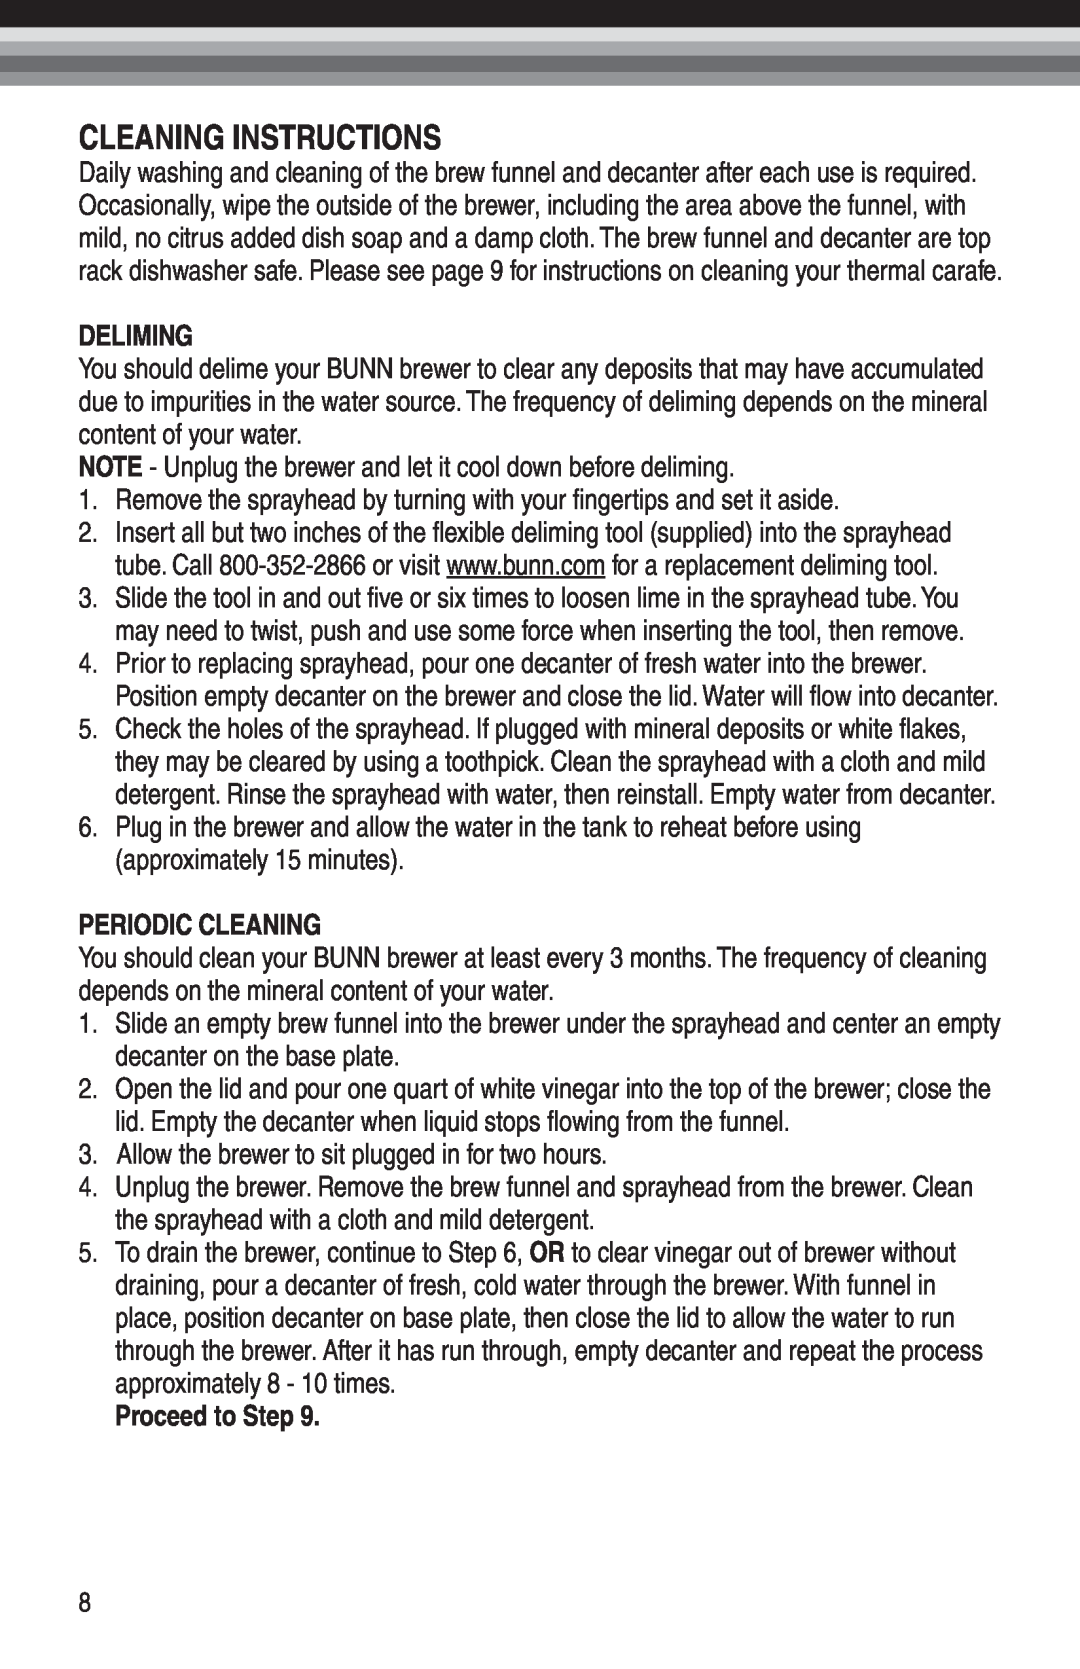 Bunn NHBX-W, STX, NHBX-B manual Cleaning Instructions, Deliming, Periodic Cleaning, Proceed to Step 